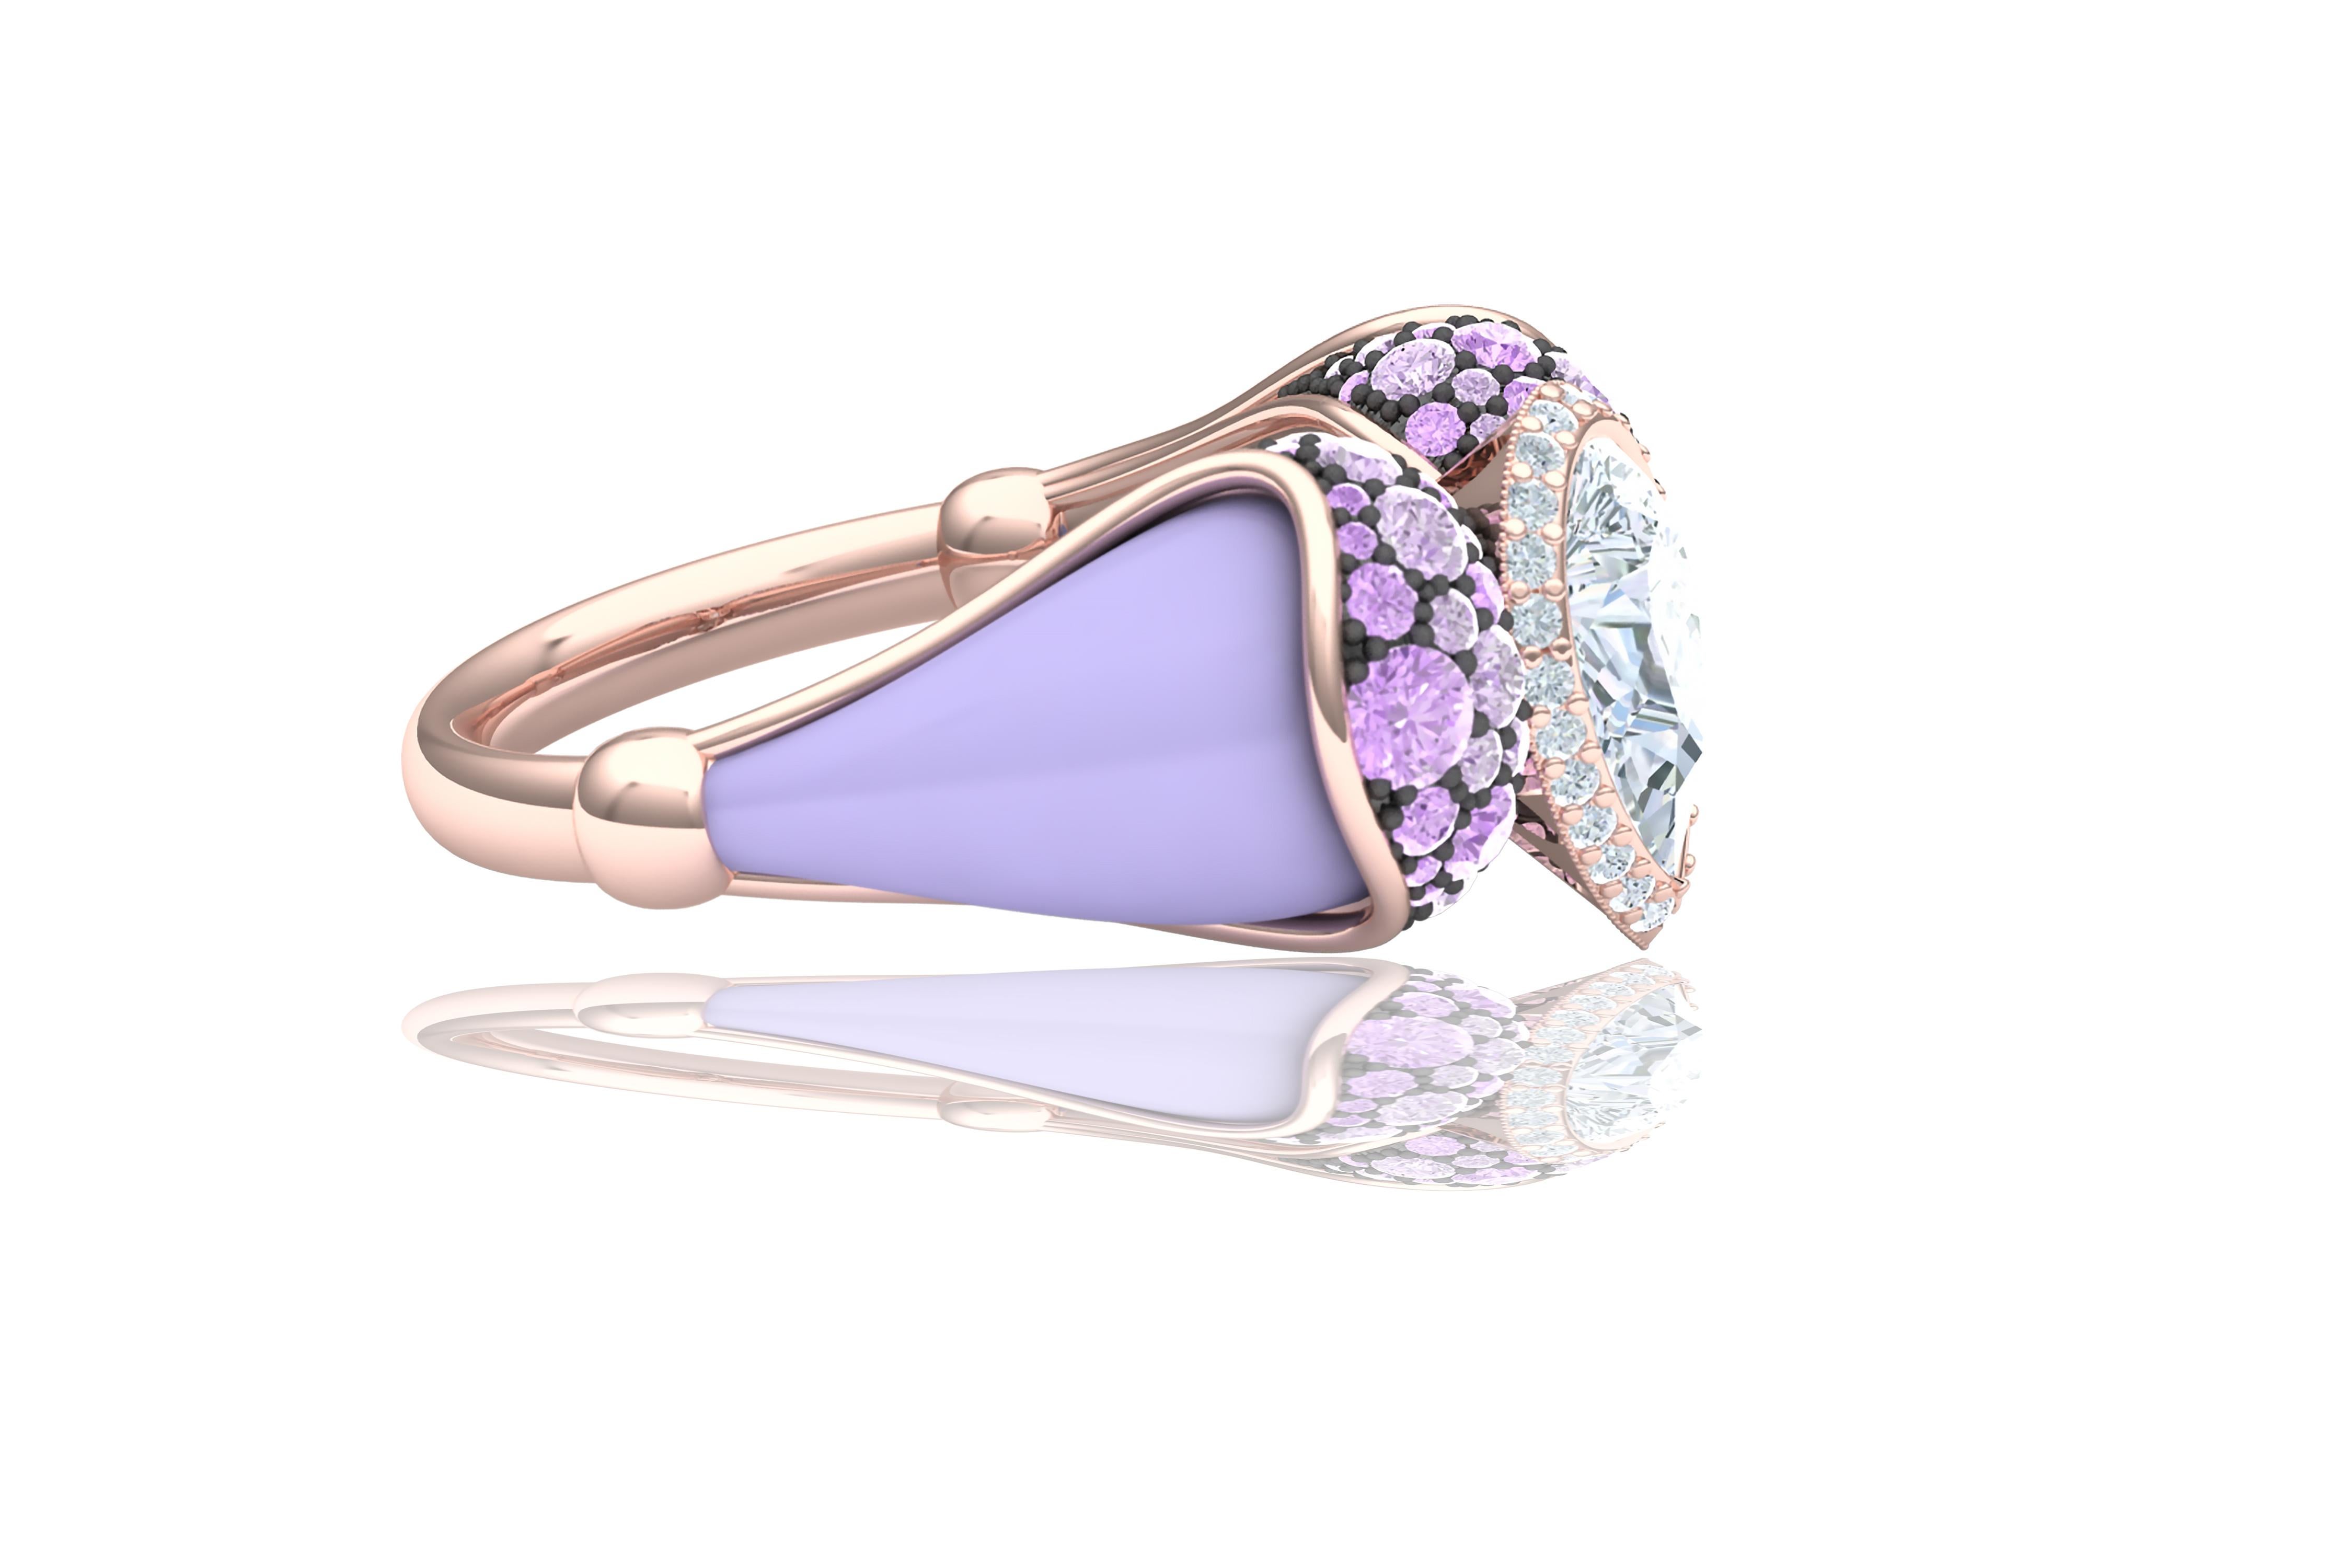 A stunning display of all shades purple can be seen in this stunning cocktail ring.  The center stone of this gorgeous ring is a 1 carat Pear shape GIA certified diamond.  The center stone is complimented by over one carat of light purple sapphires